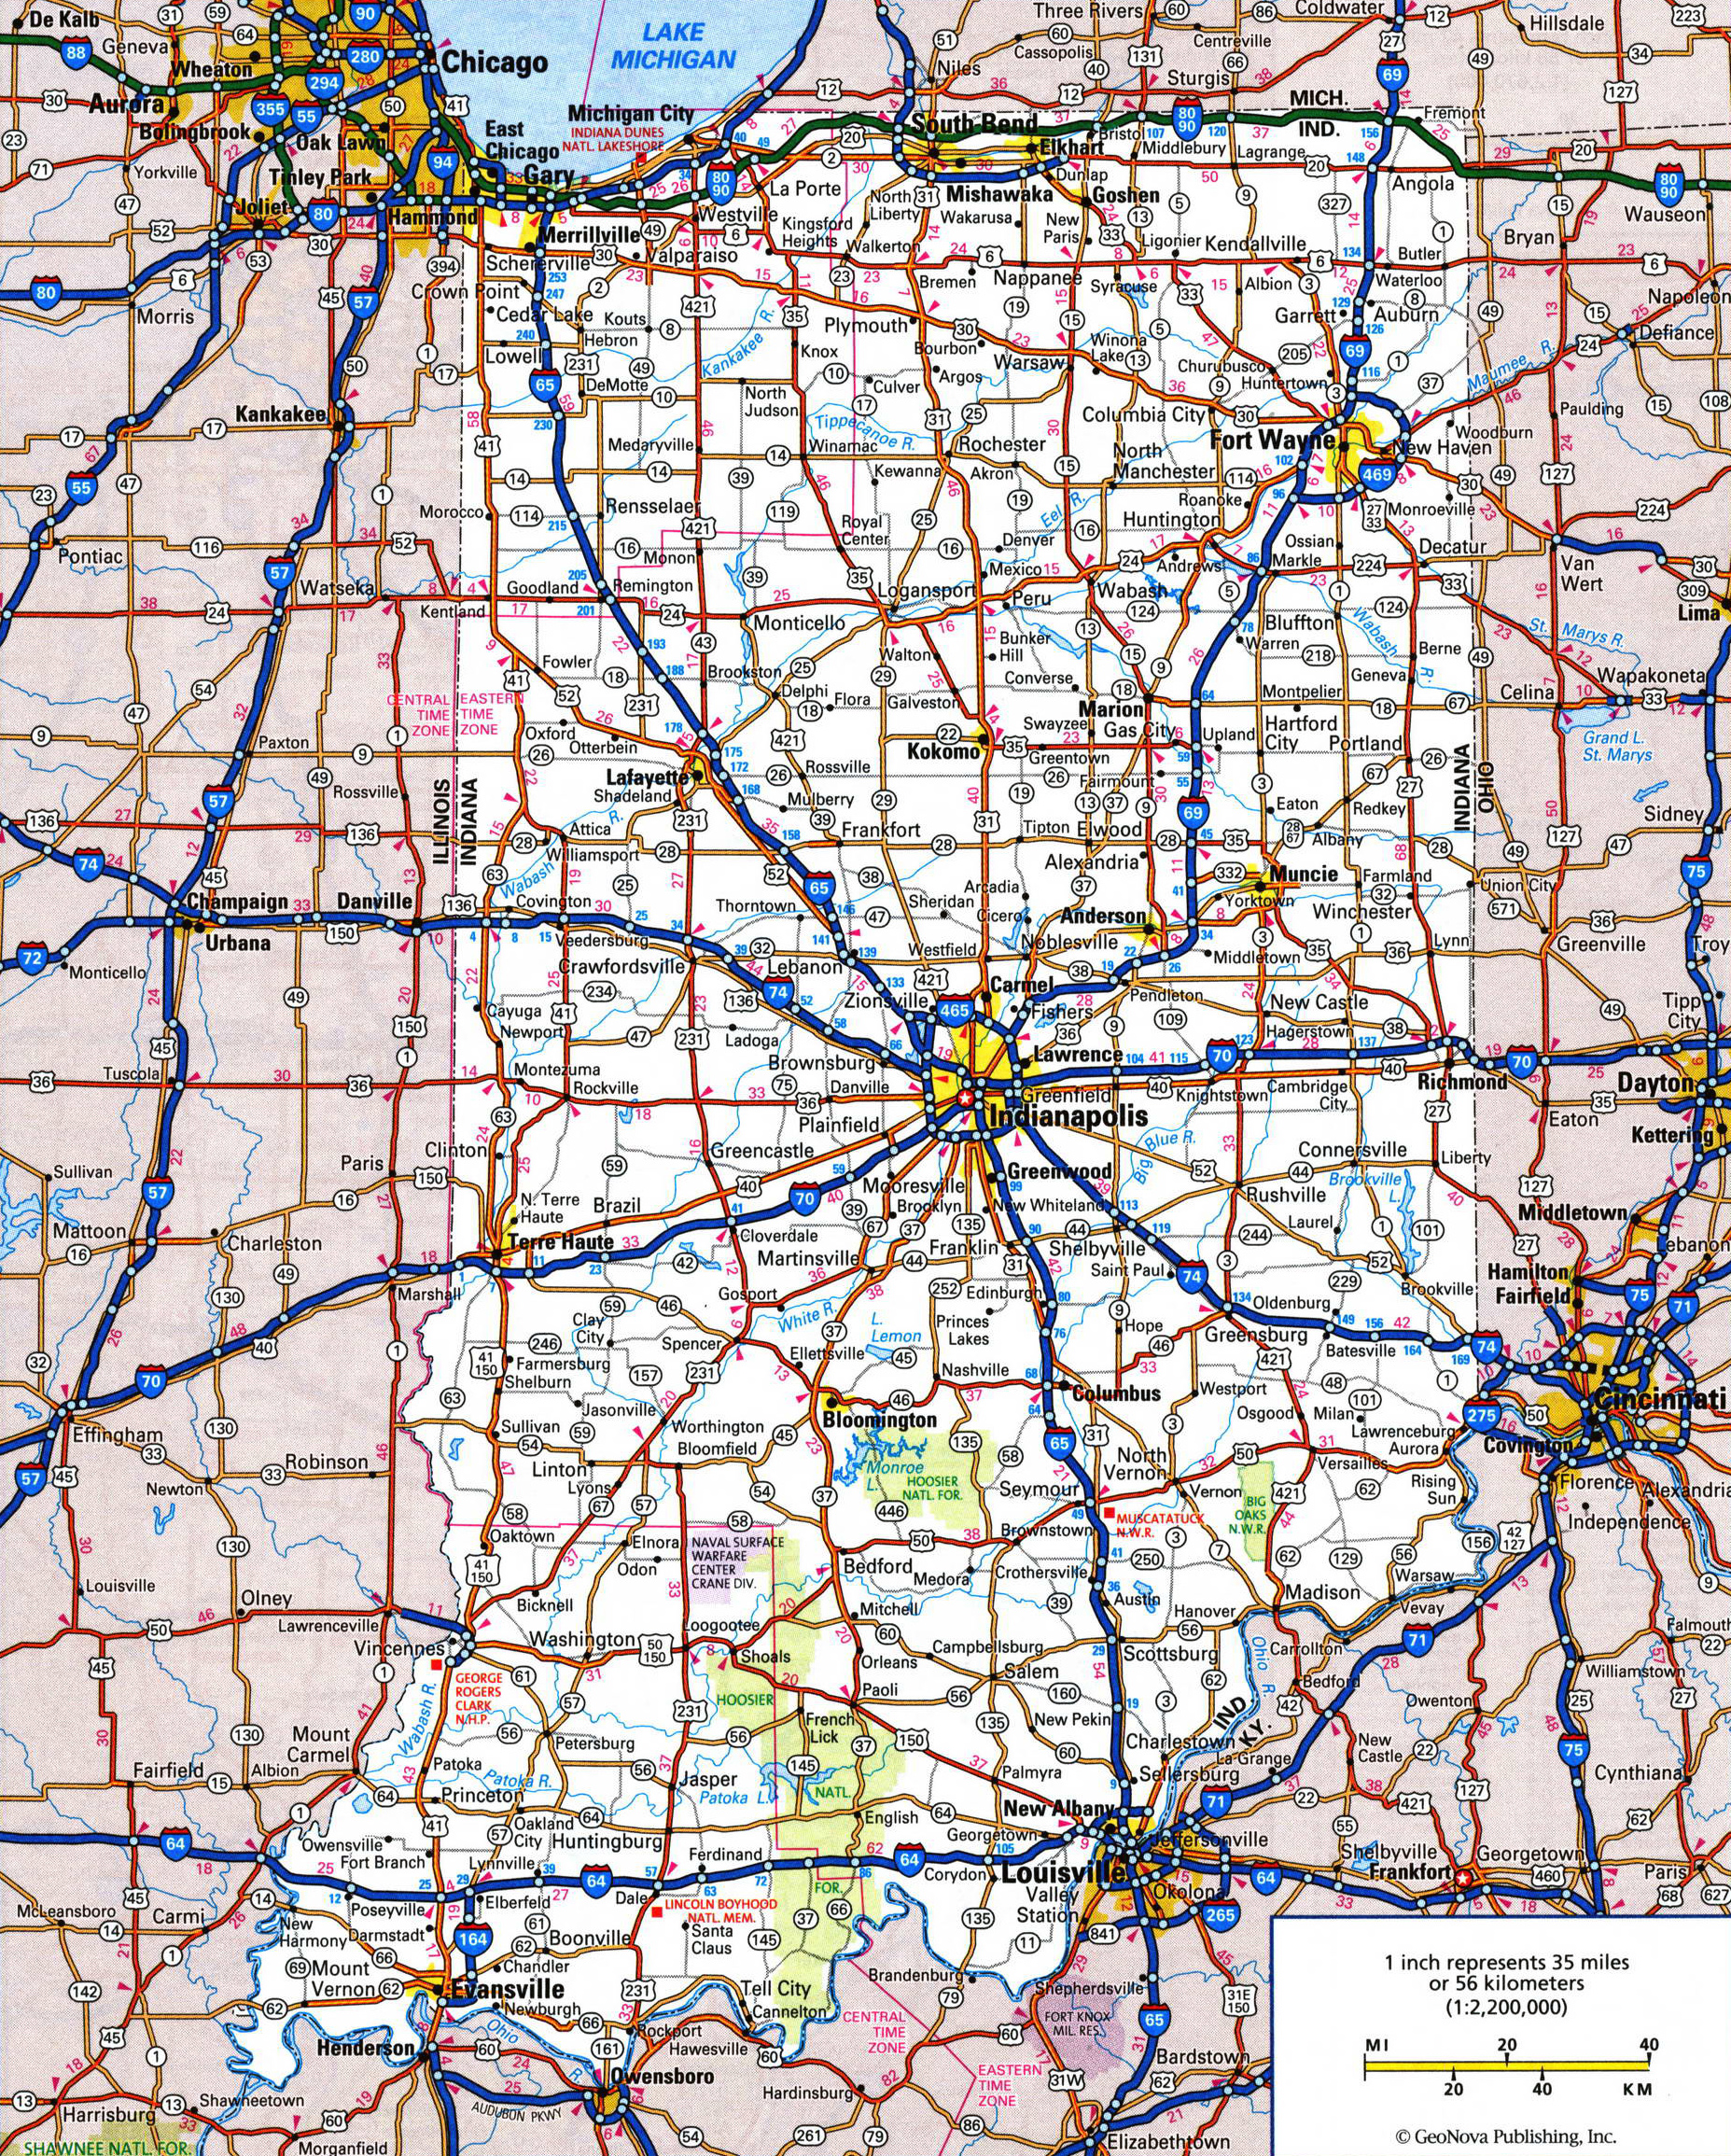 Indiana State Highway Map Large Detailed Roads And Highways Map Of Indiana State With All Cities And  National Parks | Indiana State | Usa | Maps Of The Usa | Maps Collection Of  The United States Of America